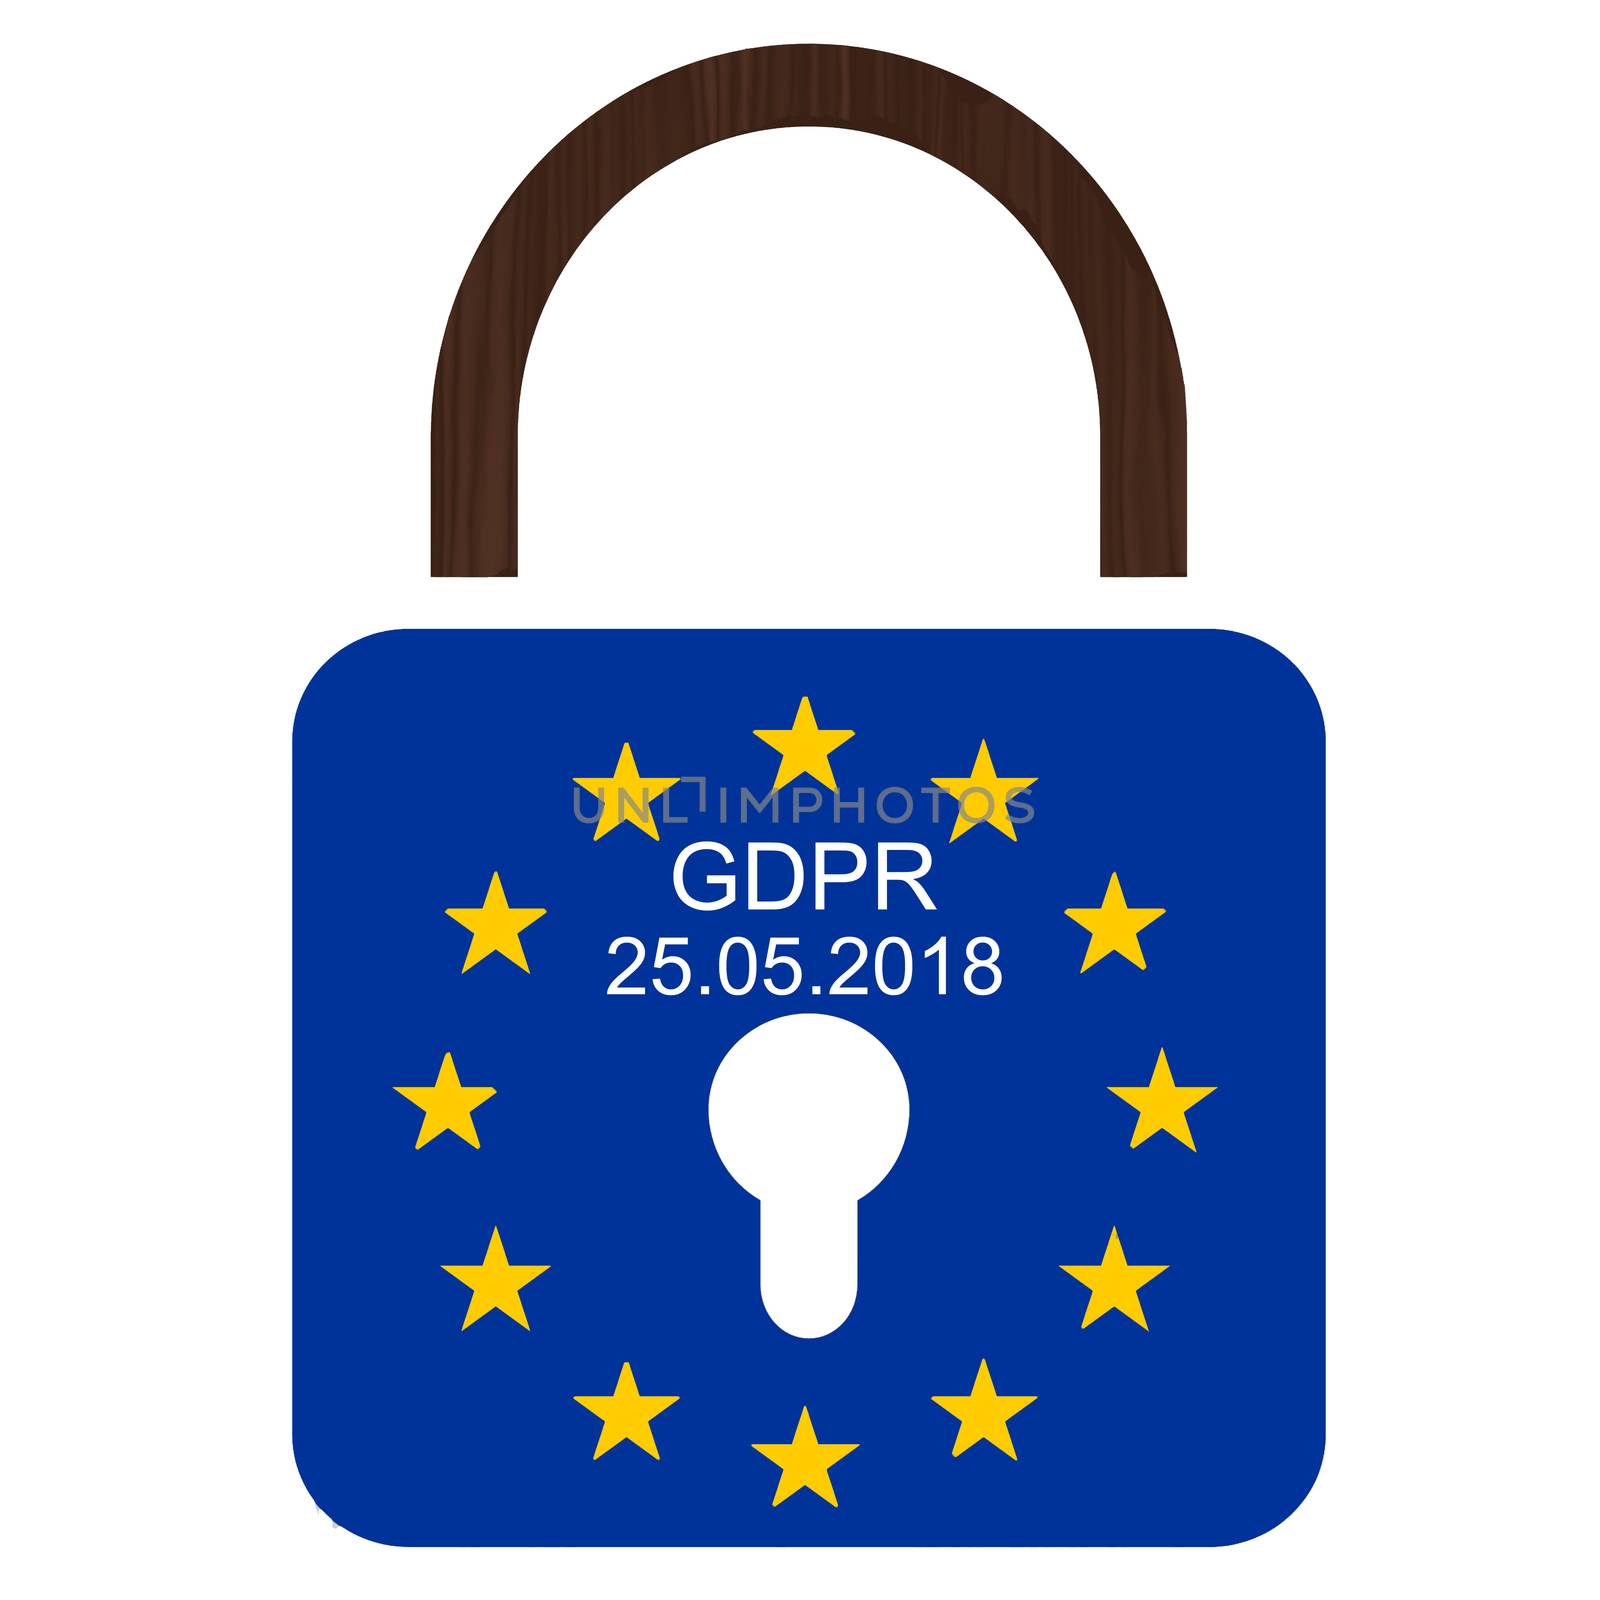 European flag with text GDPR and 25.05.2018